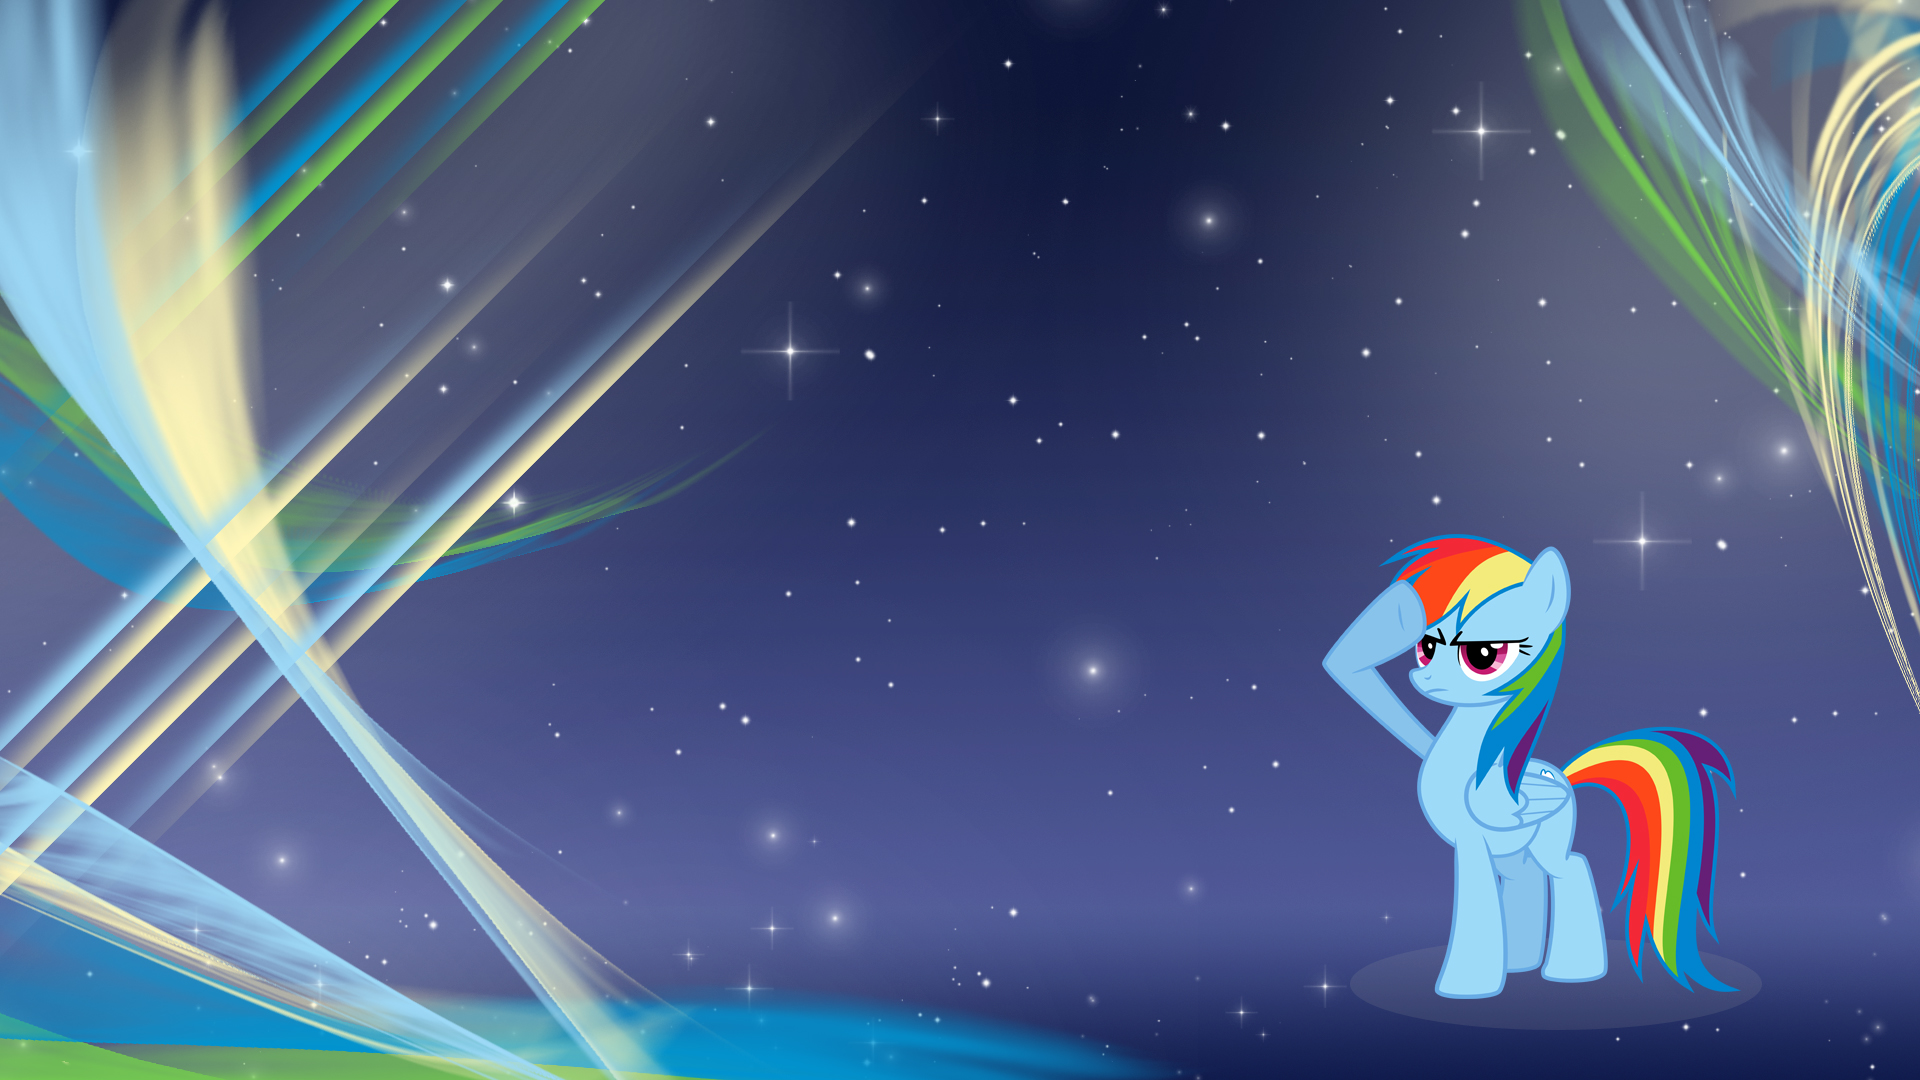 MLP: FiM - Rainbow Dash V2 by Lixr and Unfiltered-N